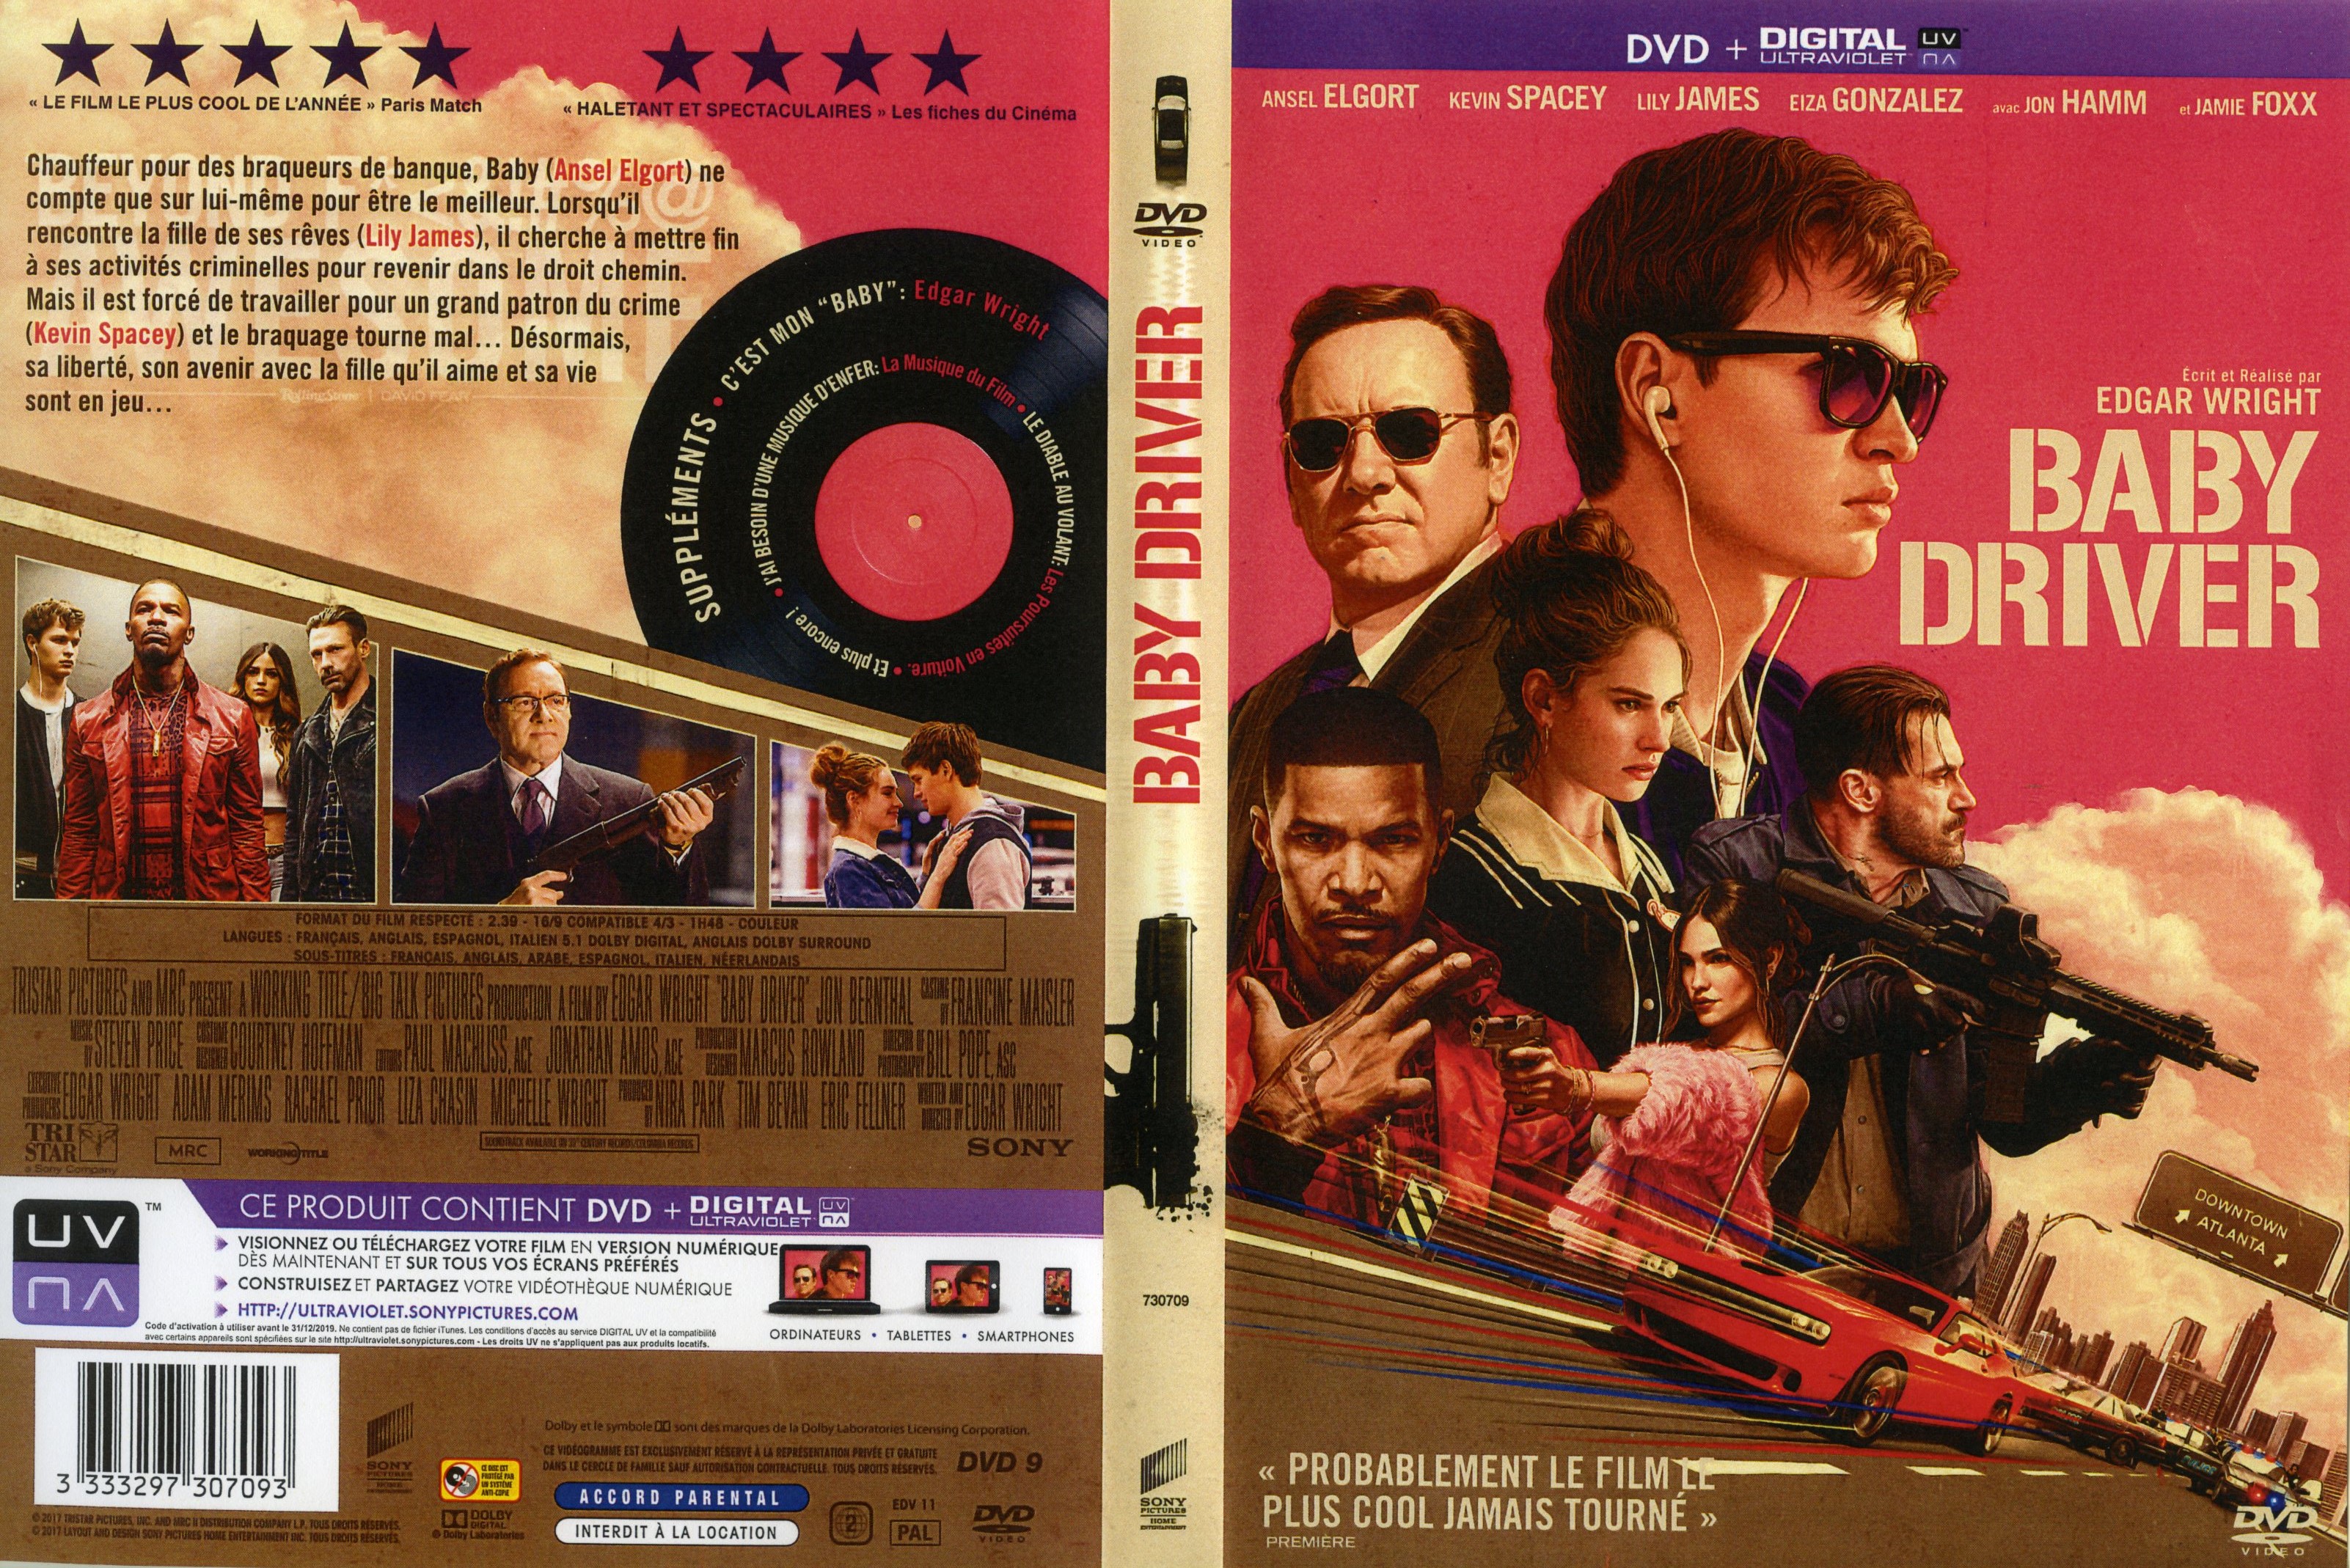 Jaquette DVD Baby driver